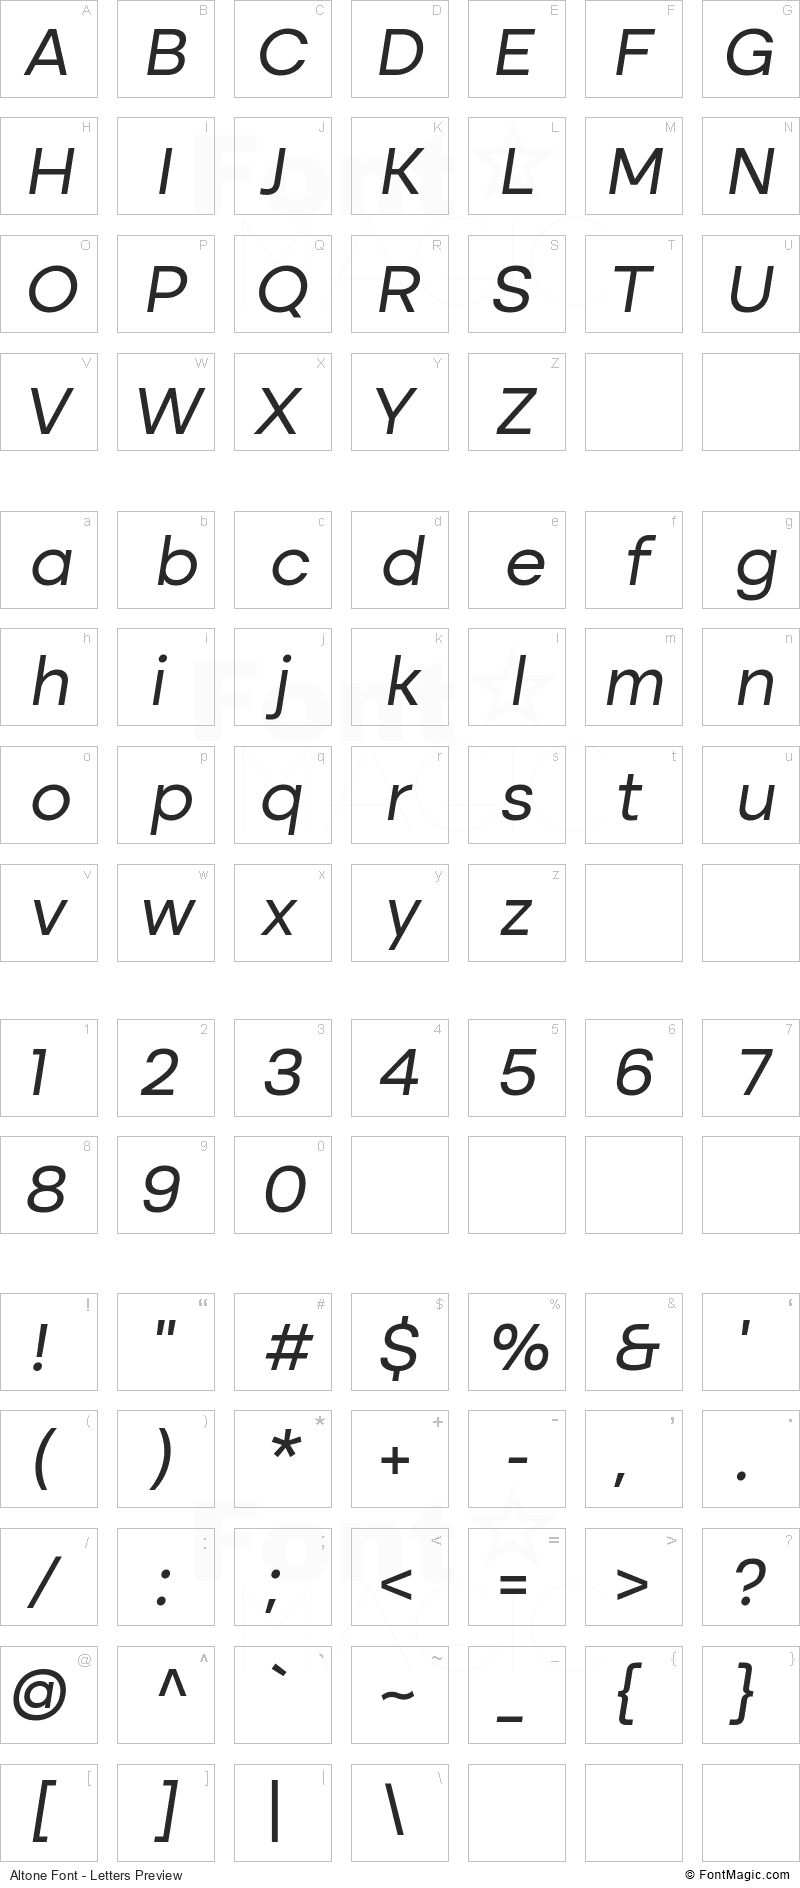 Altone Font - All Latters Preview Chart